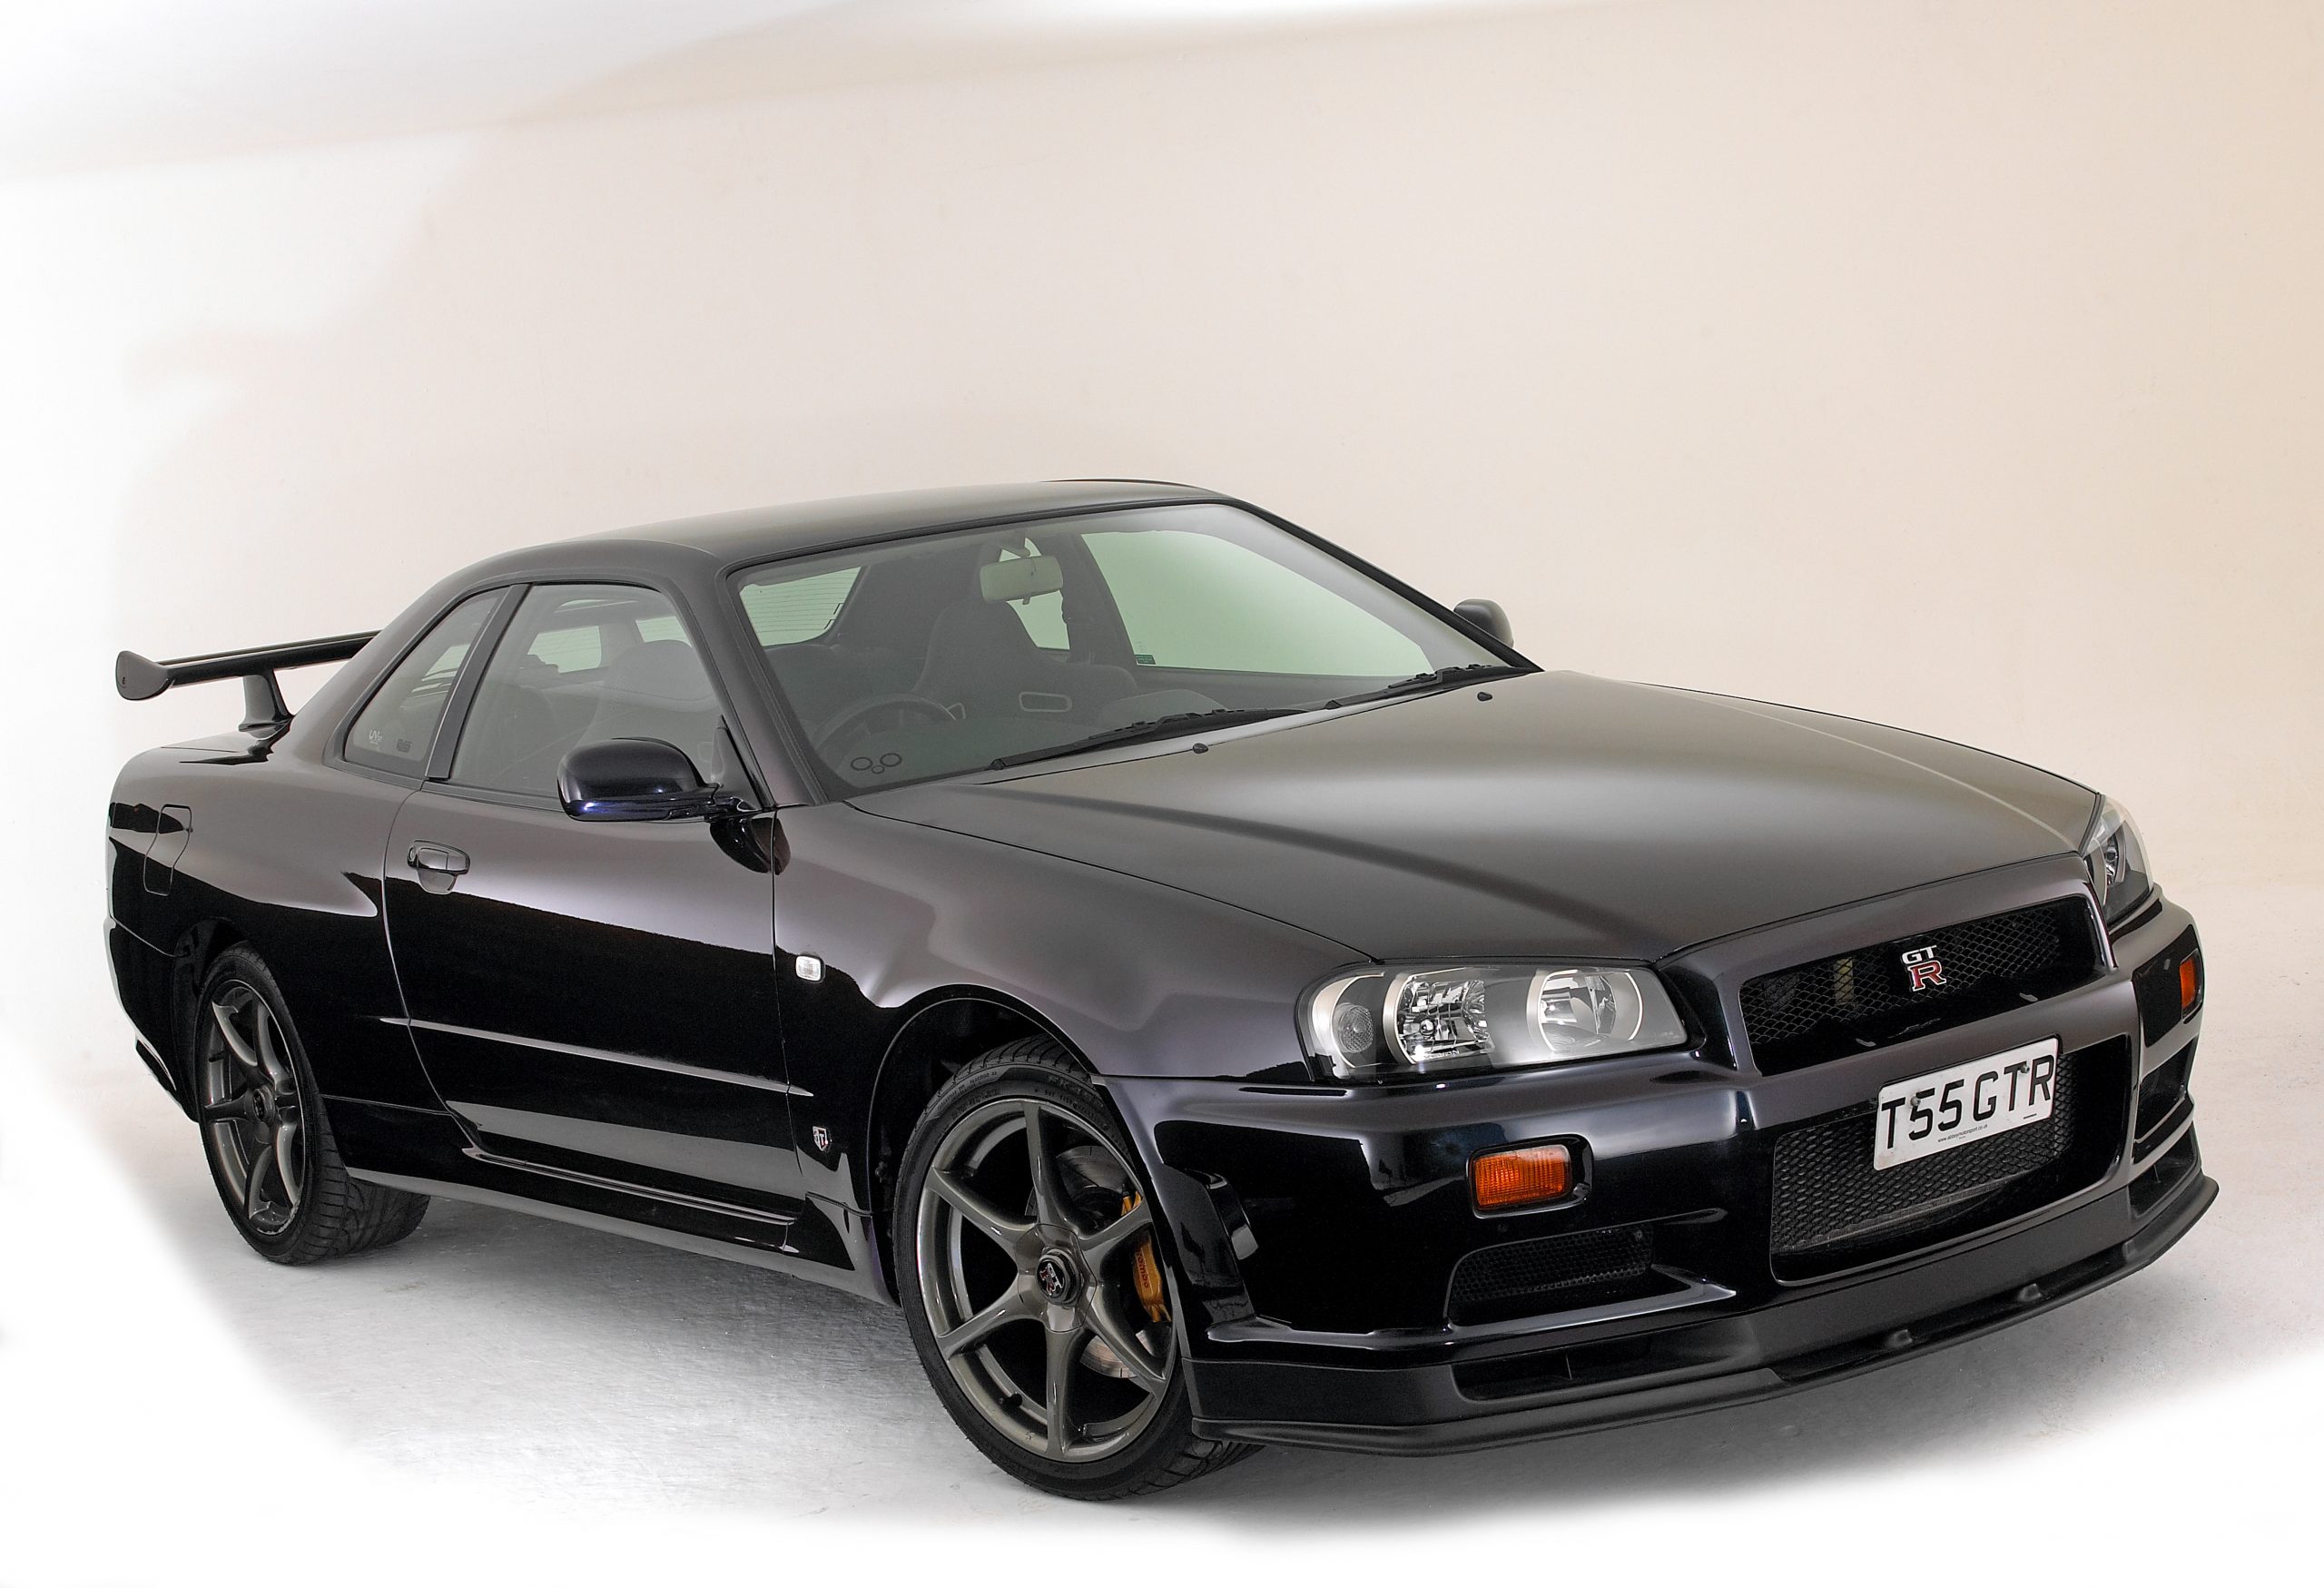 An image of a Nissan Skyline GT-R parked in a photo studio.